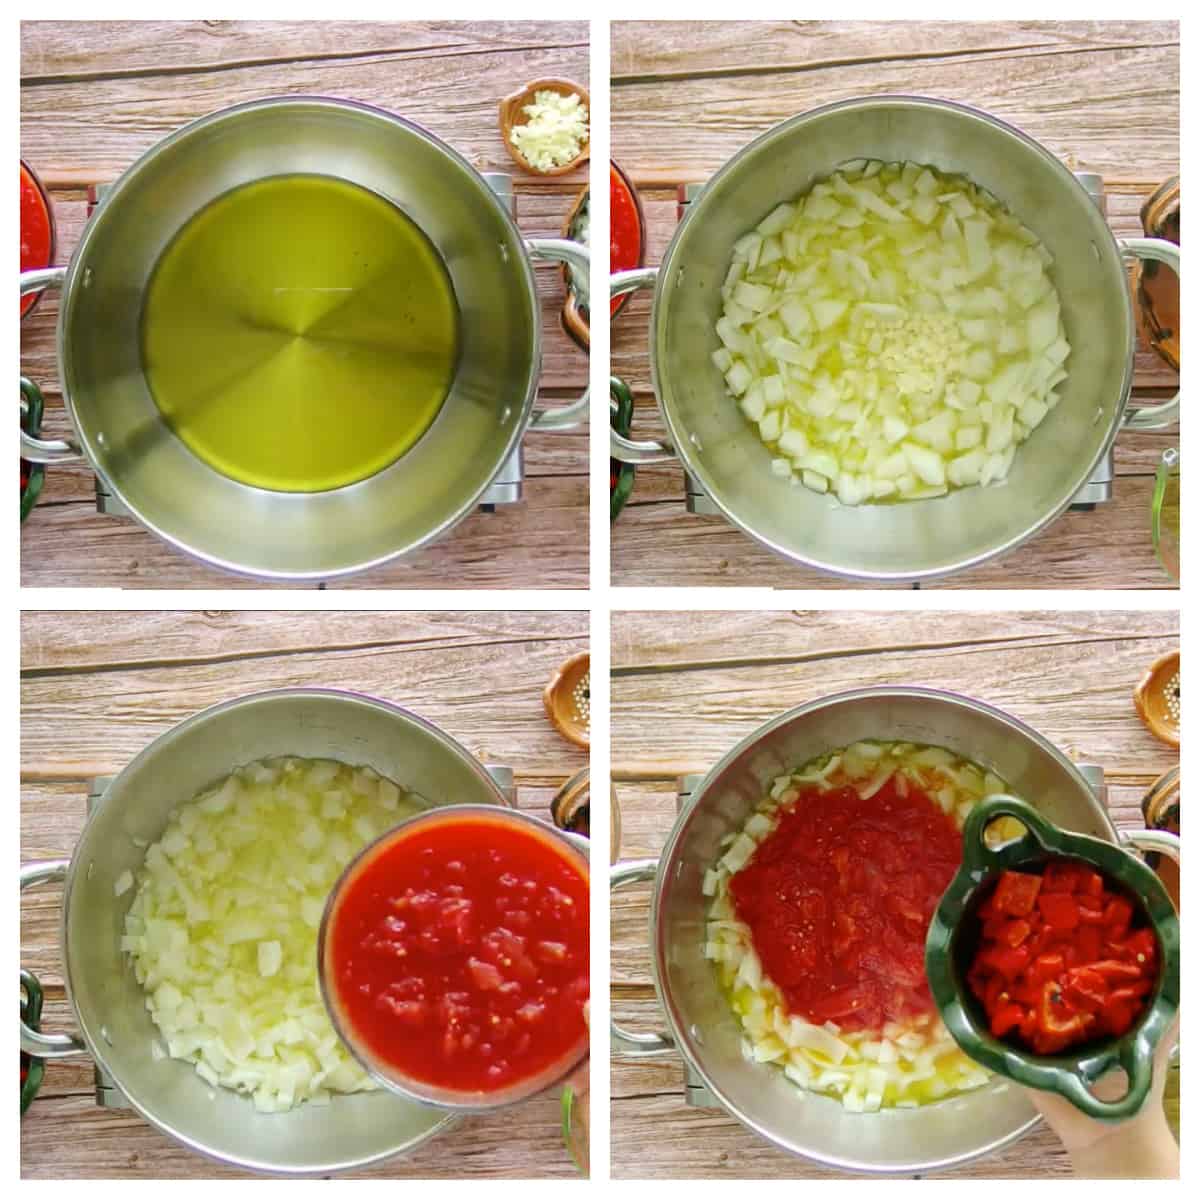 A collage showing how to make the tomato sauce.